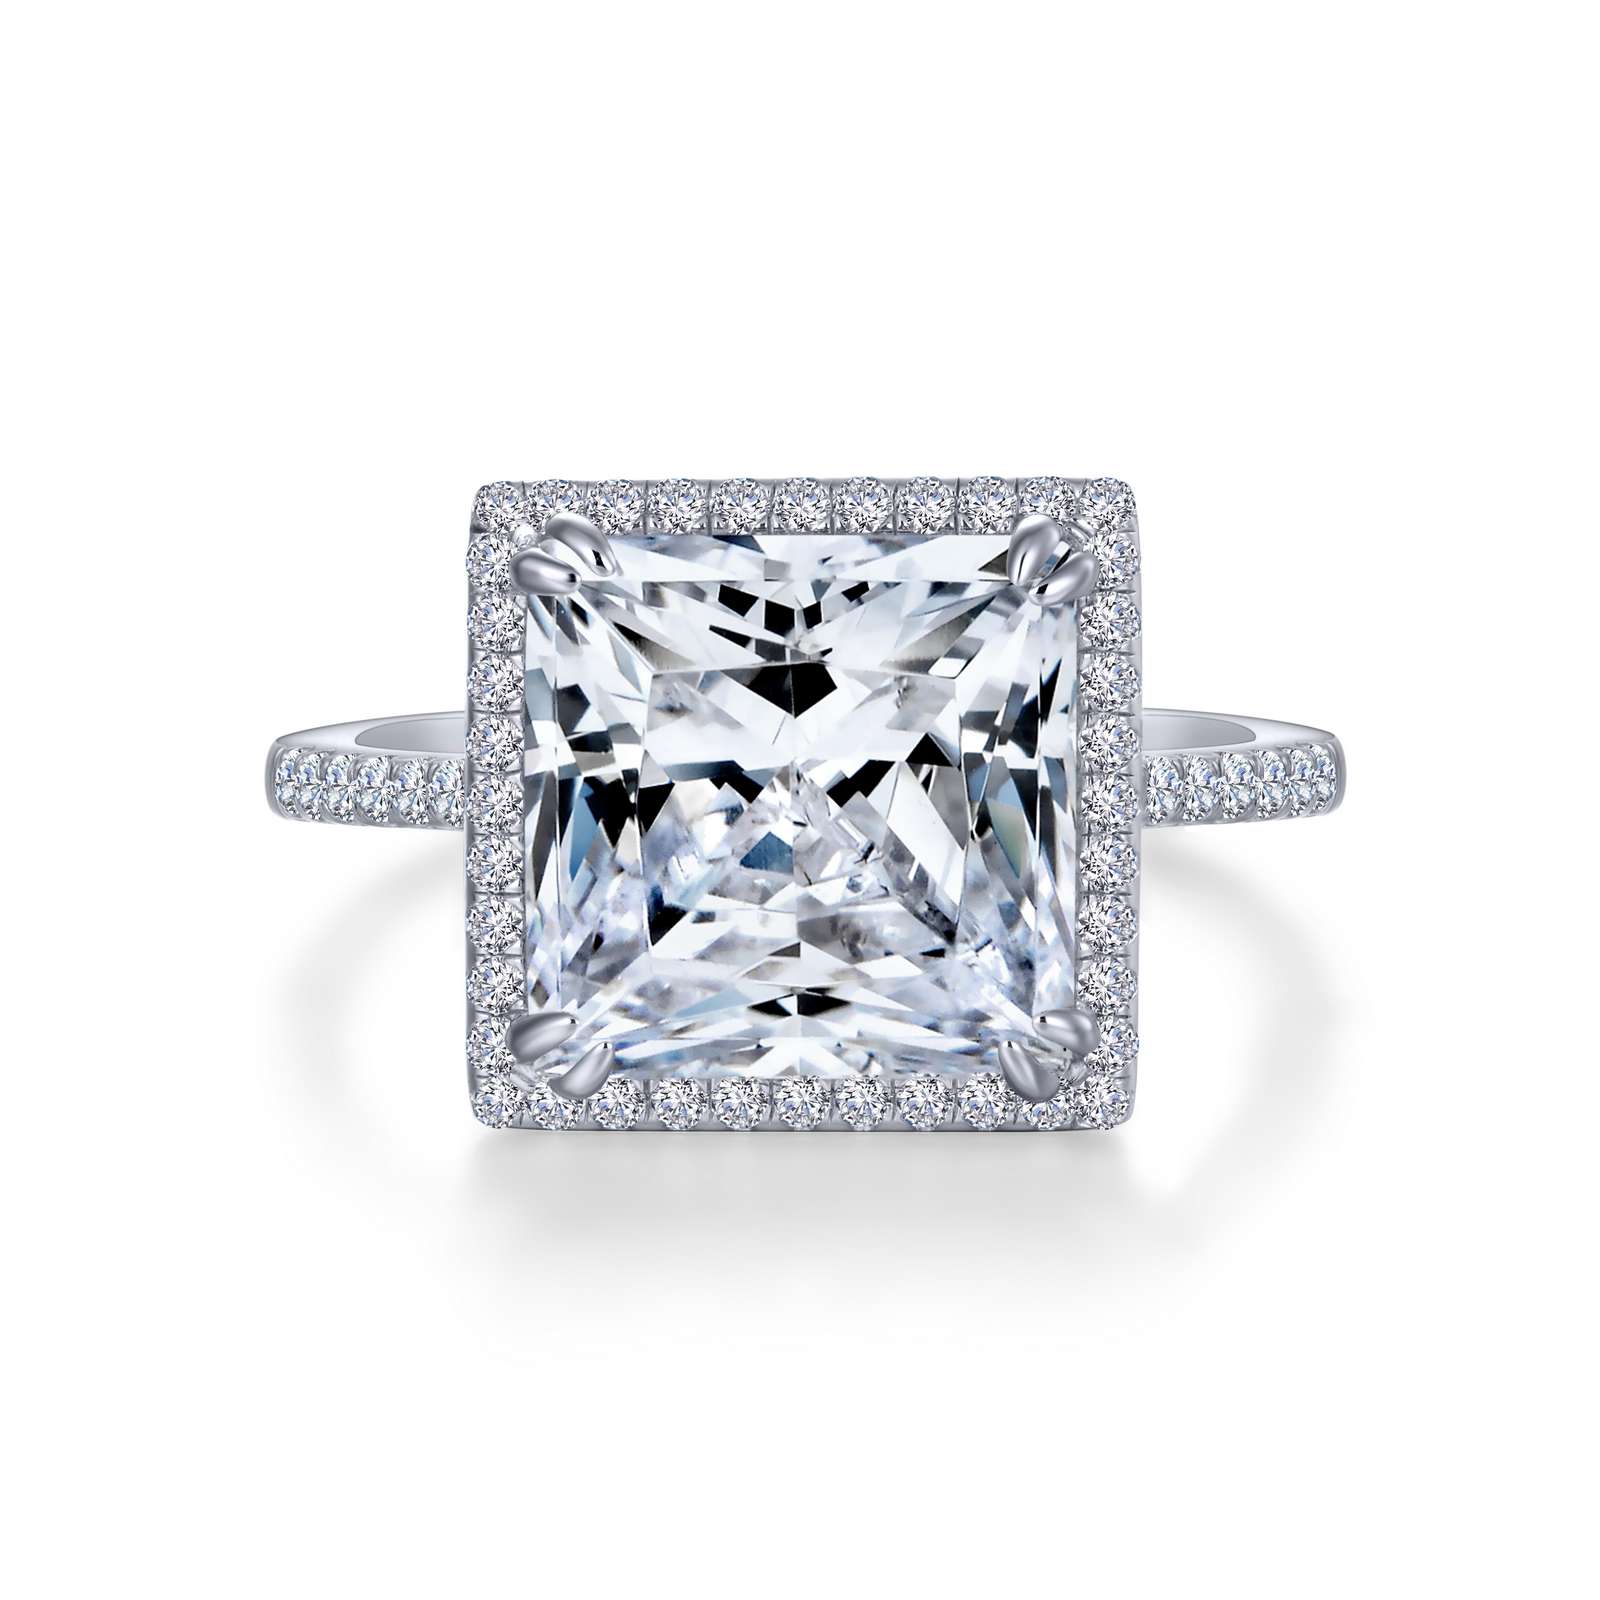 Stunning Engagement Ring Griner Jewelry Co. Moultrie, GA